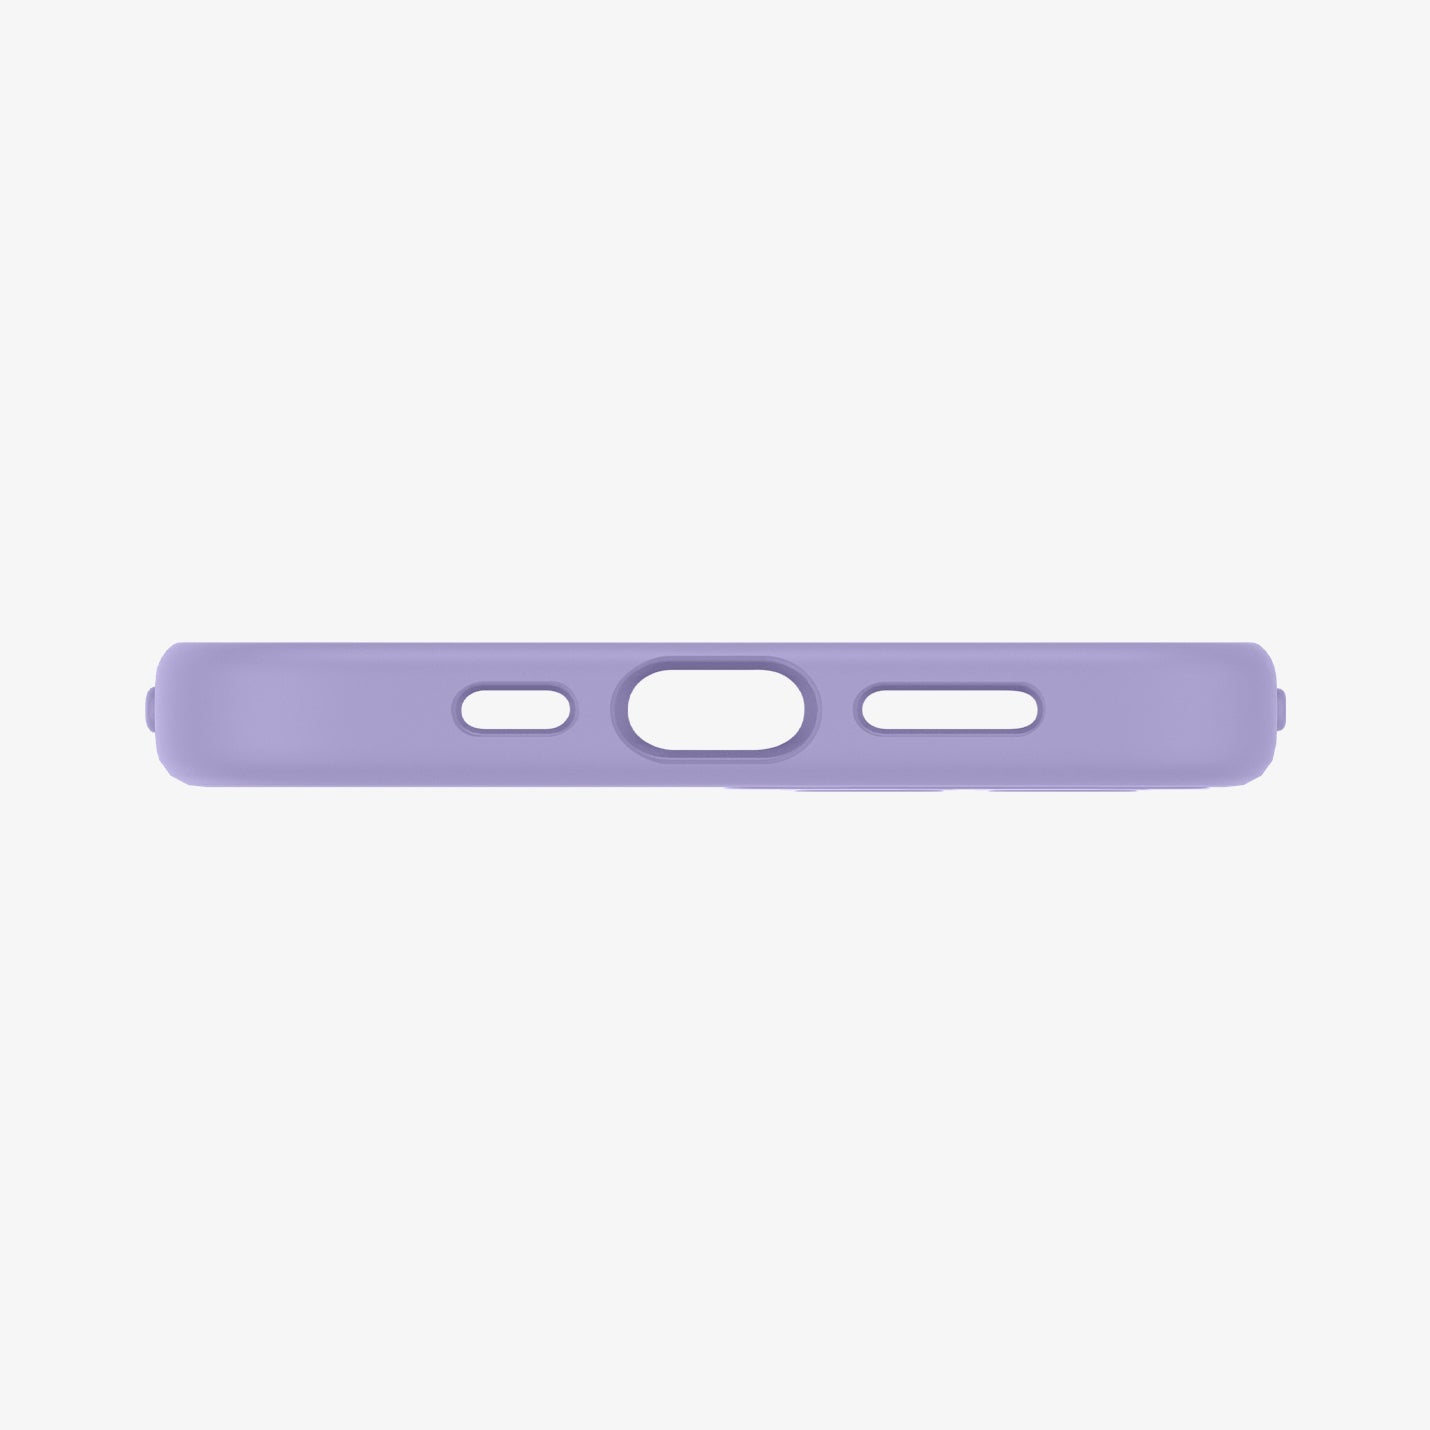 ACS03114 - iPhone 12 / 12 Pro Case Silicone Fit in iris purple showing the bottom with precise cutouts